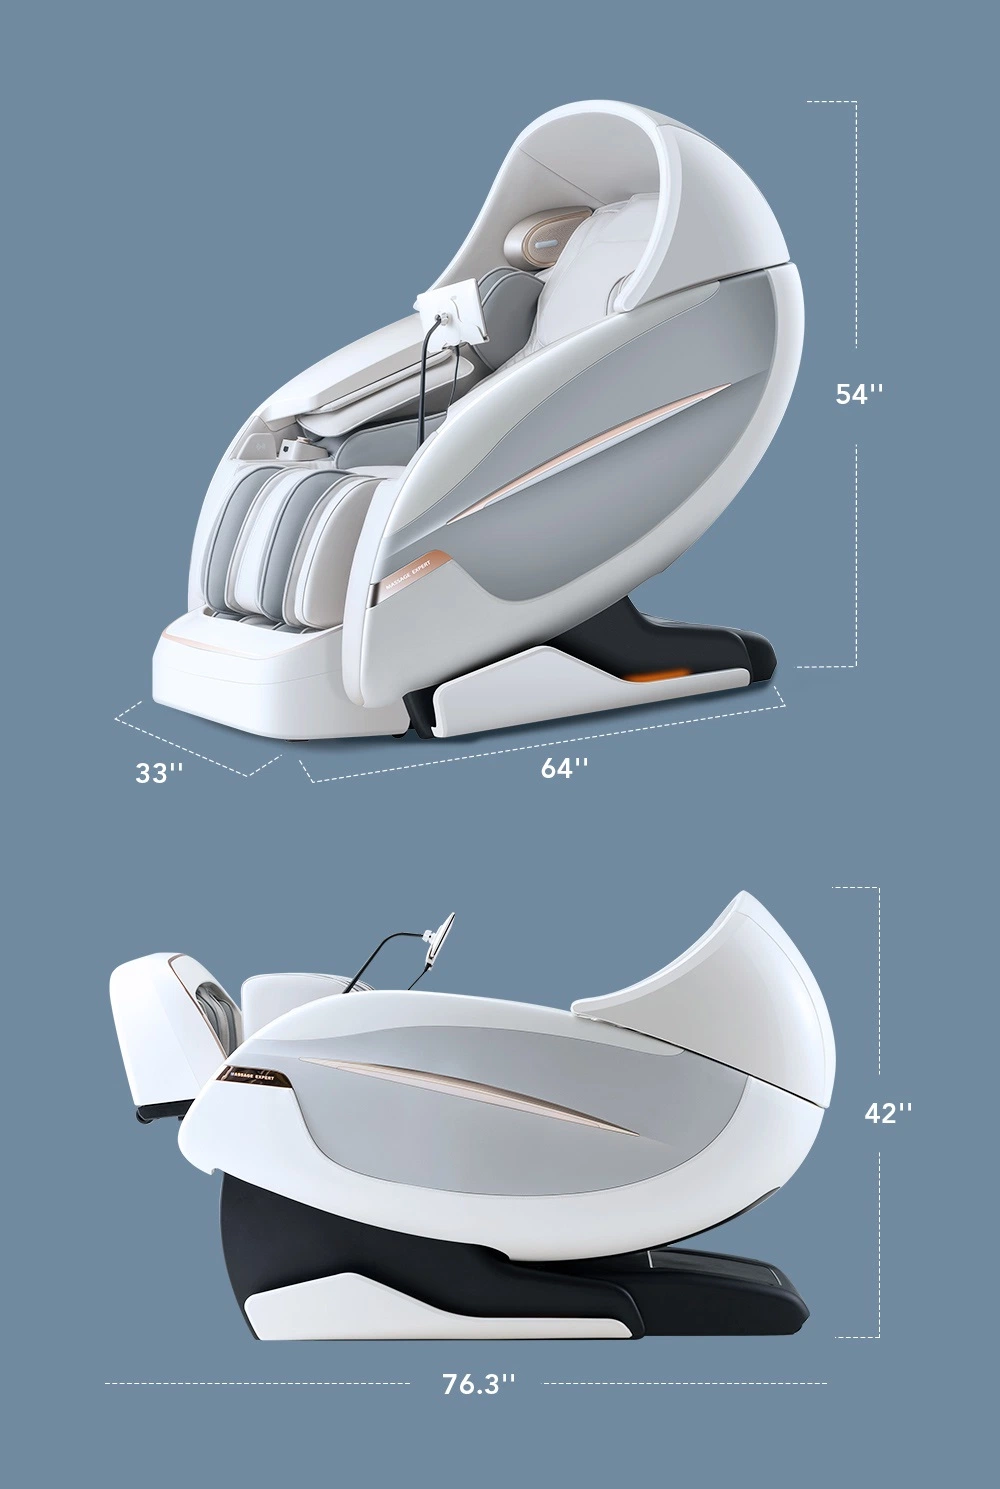 Luxury Decompress Heated Body Foot Massage Gaming Chair